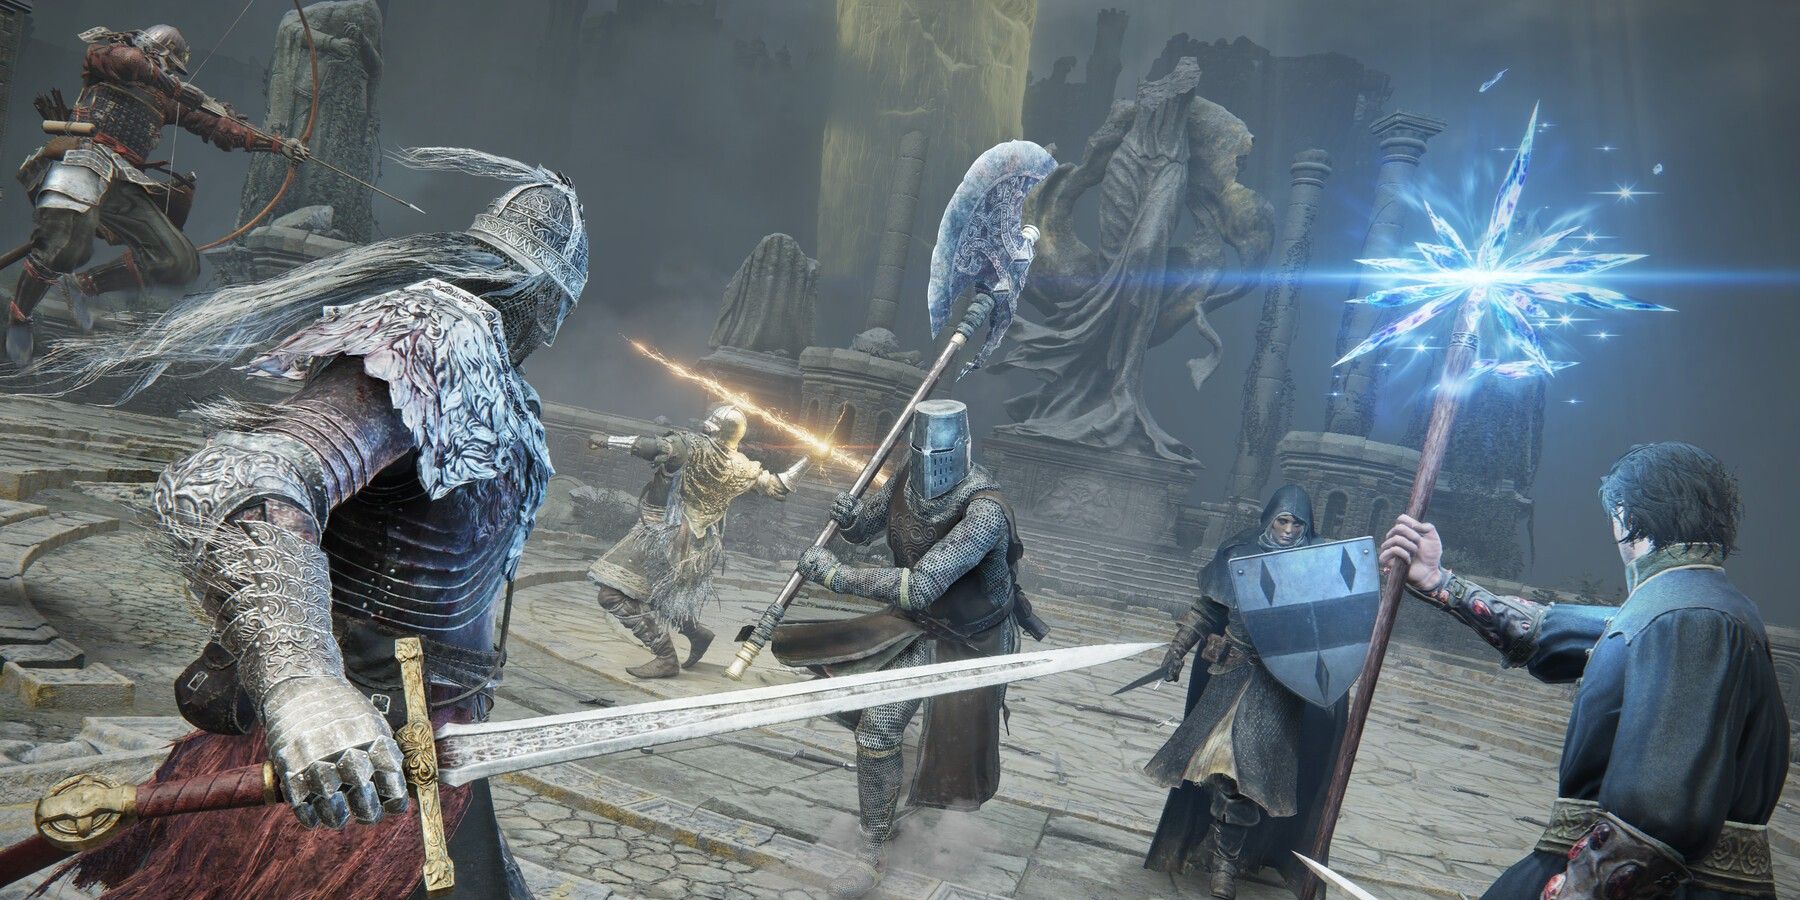 elden ring players fighting in the arena